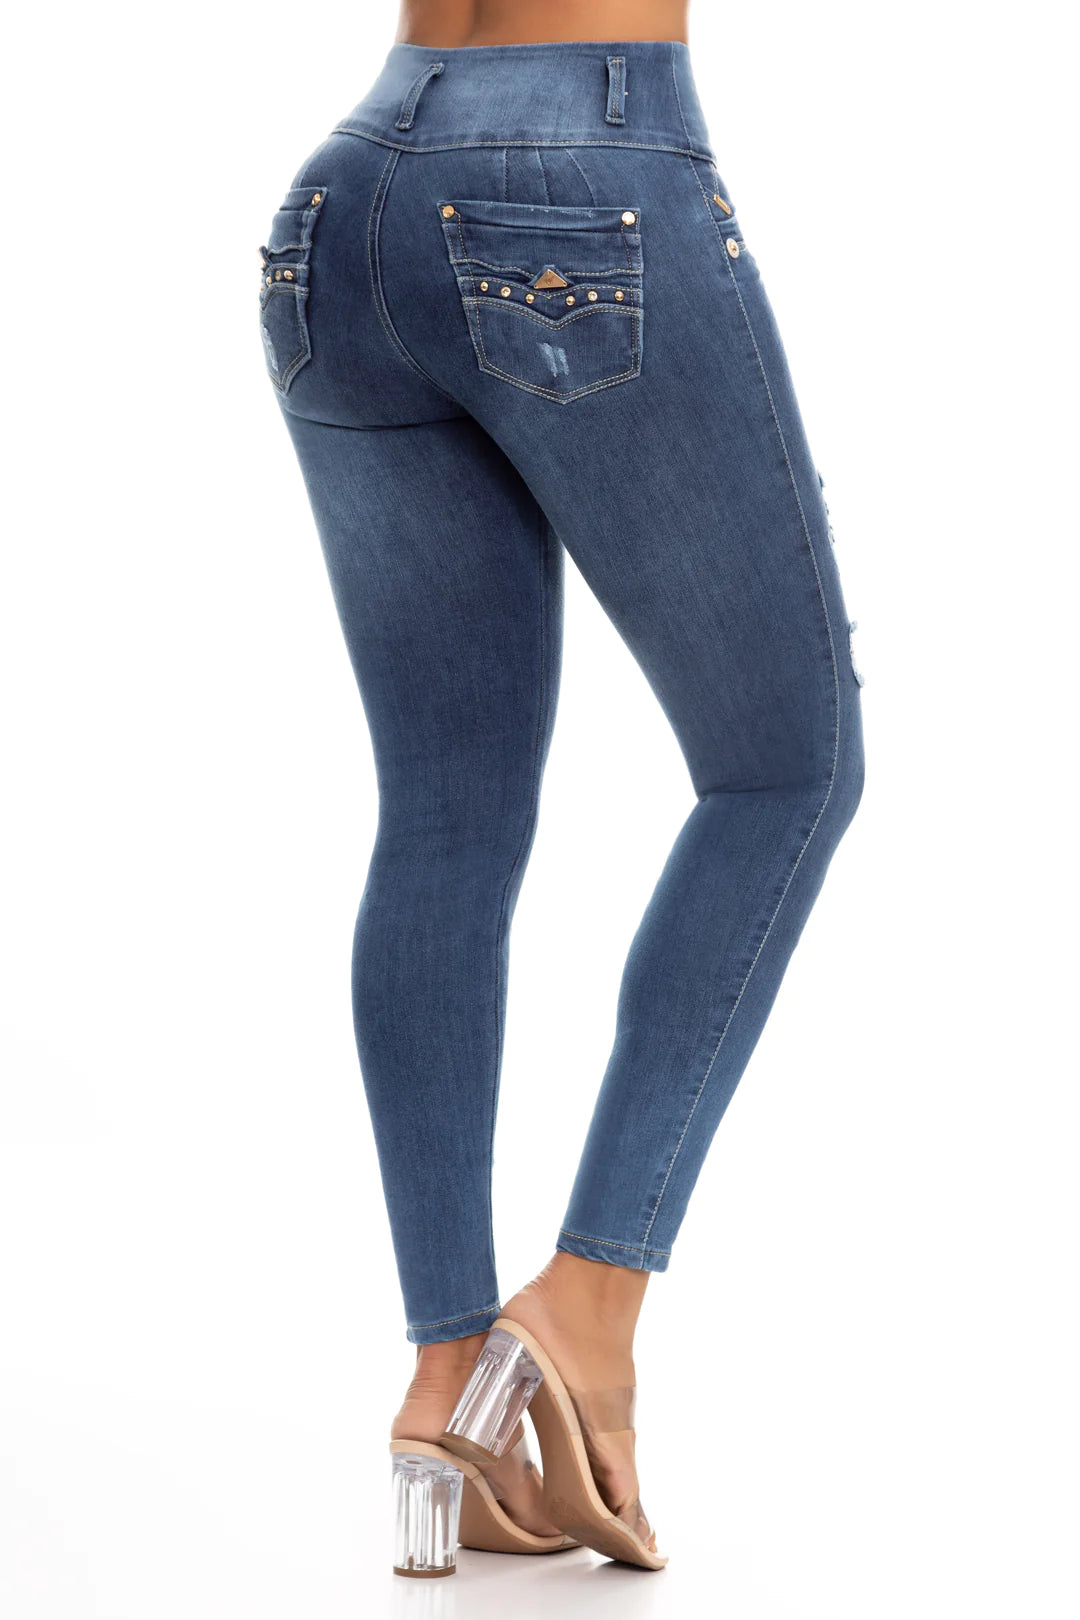 Distressed Push up High-Waisted Jean